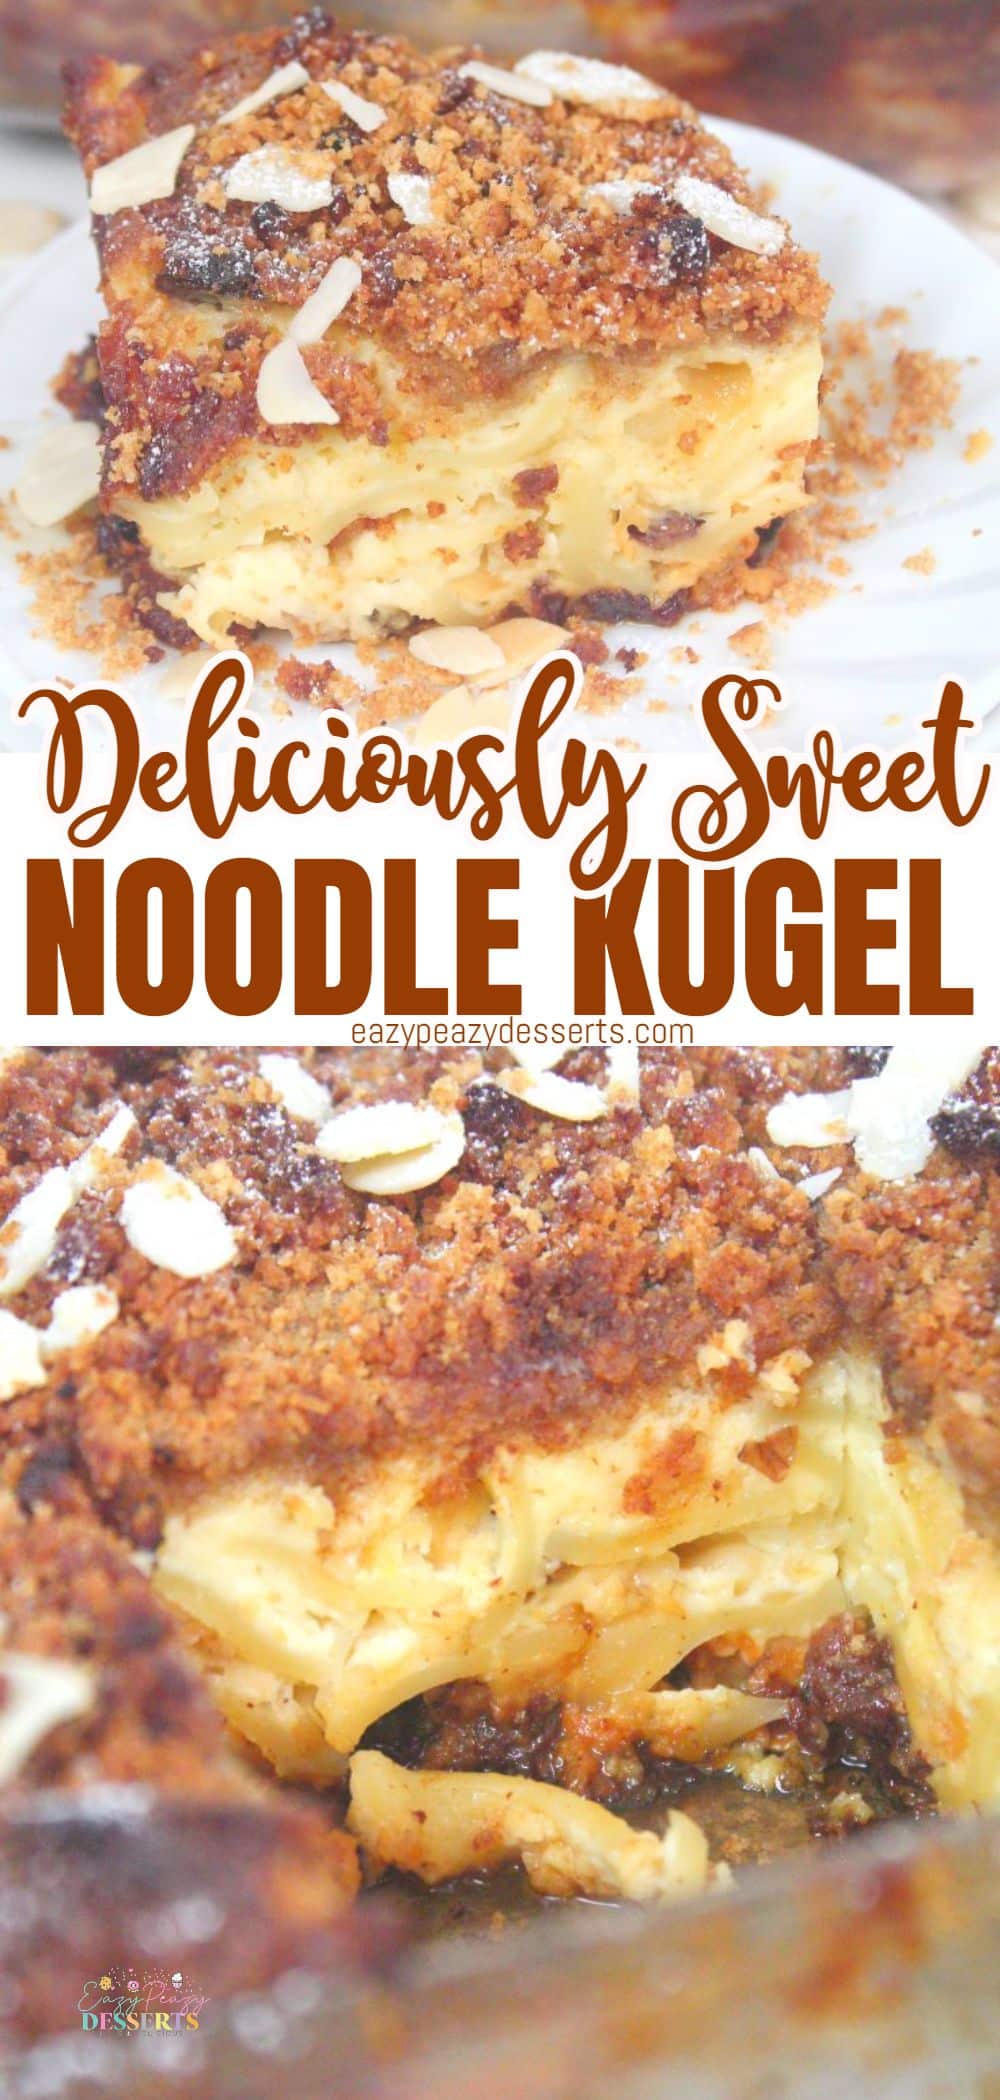 Sweet noodle kugel with raisins and almonds